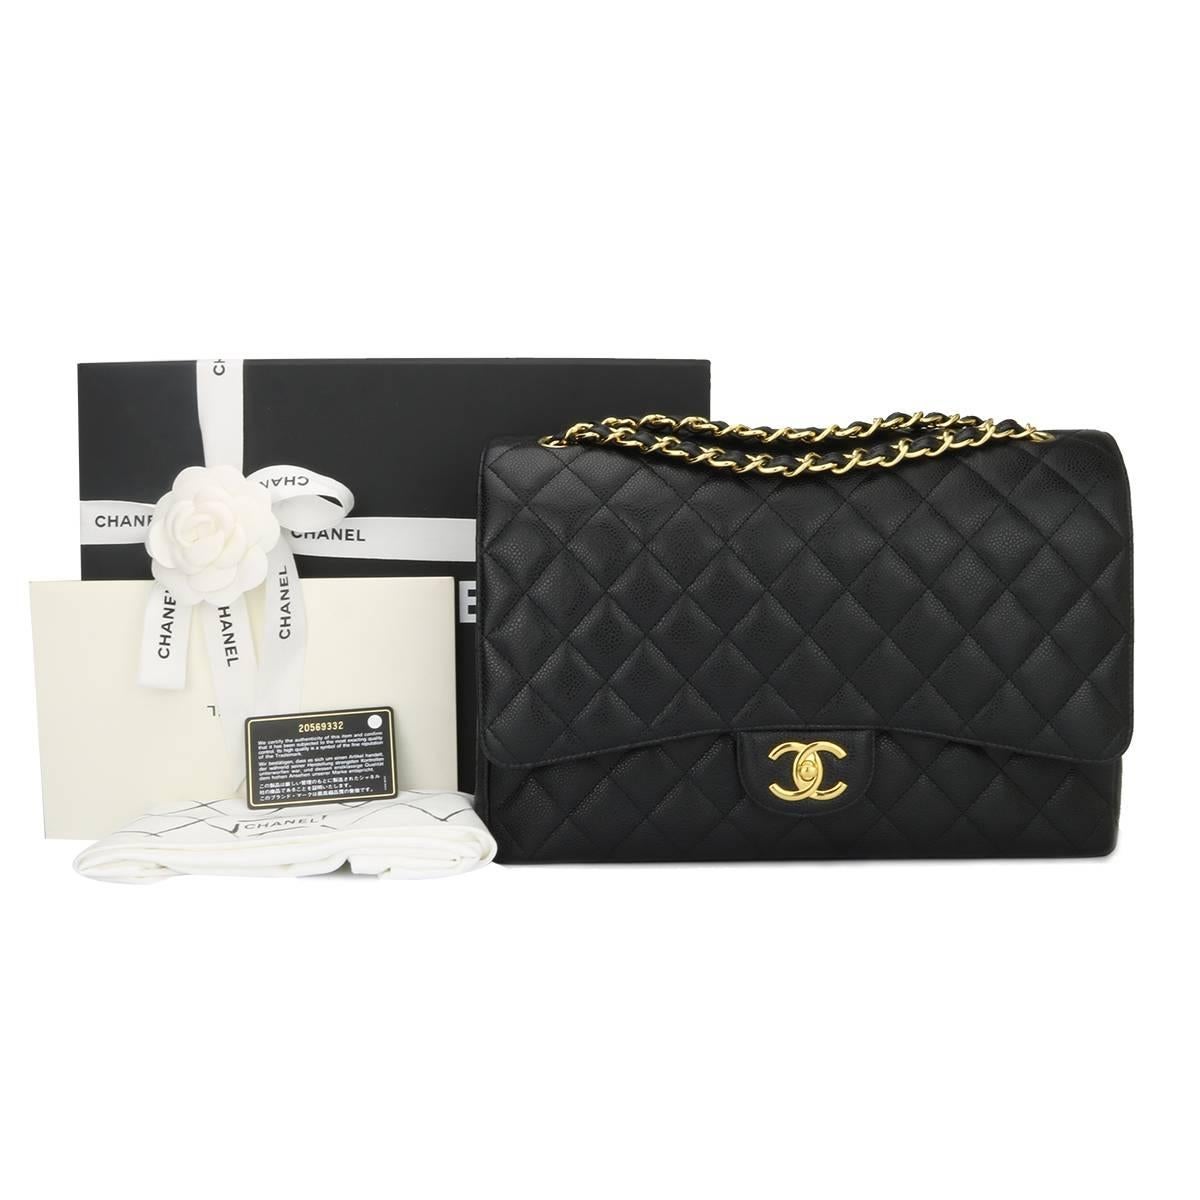 CHANEL Black Caviar Maxi Double Flap with Gold Hardware 2016 6